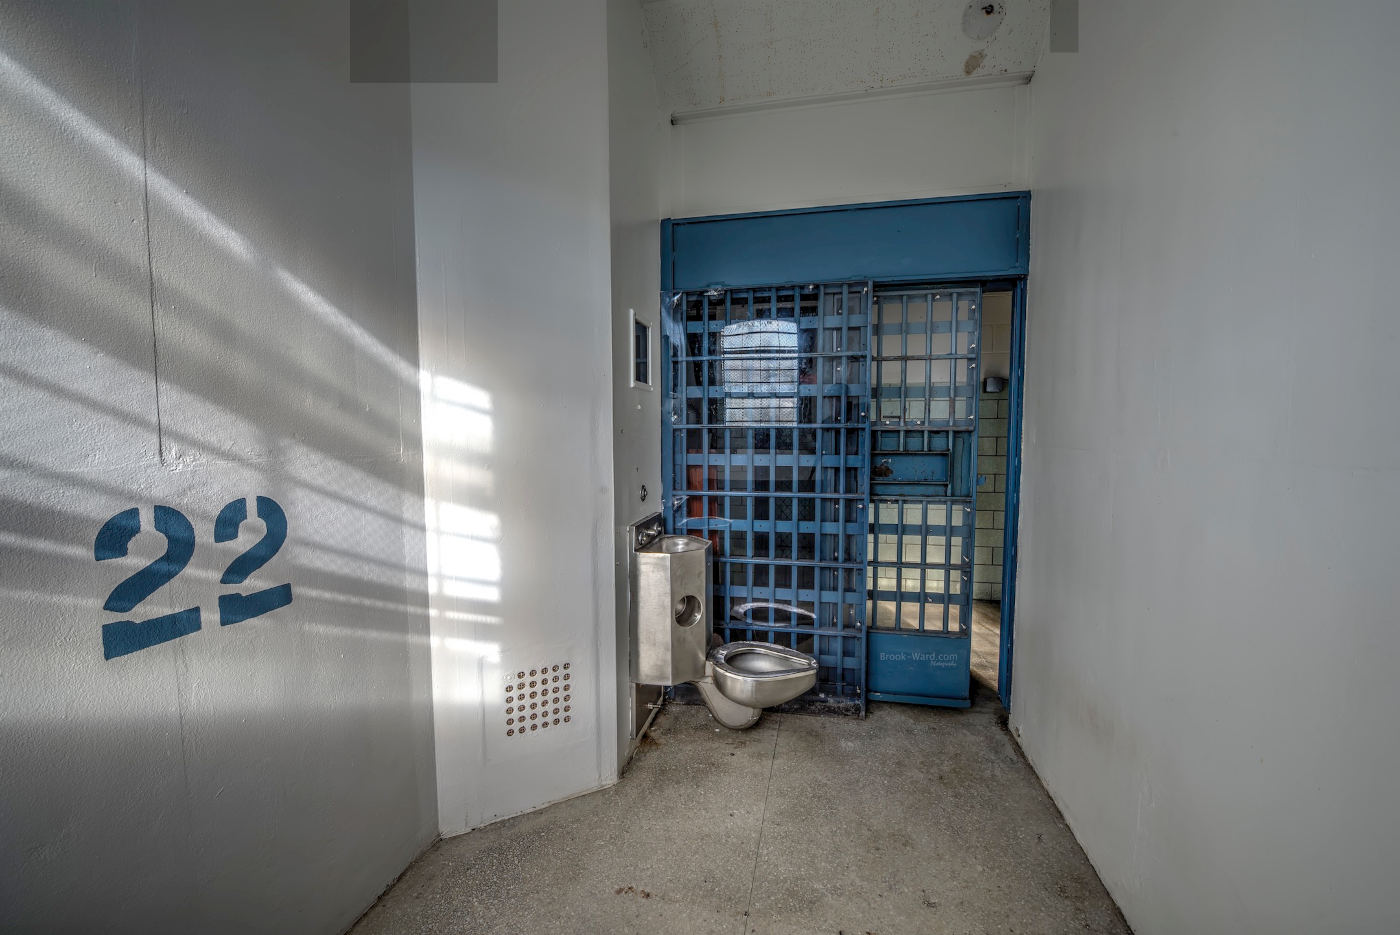 Title: Solitary Confinement | Credit: Brook Ward | License: CC BY-NC 2.0